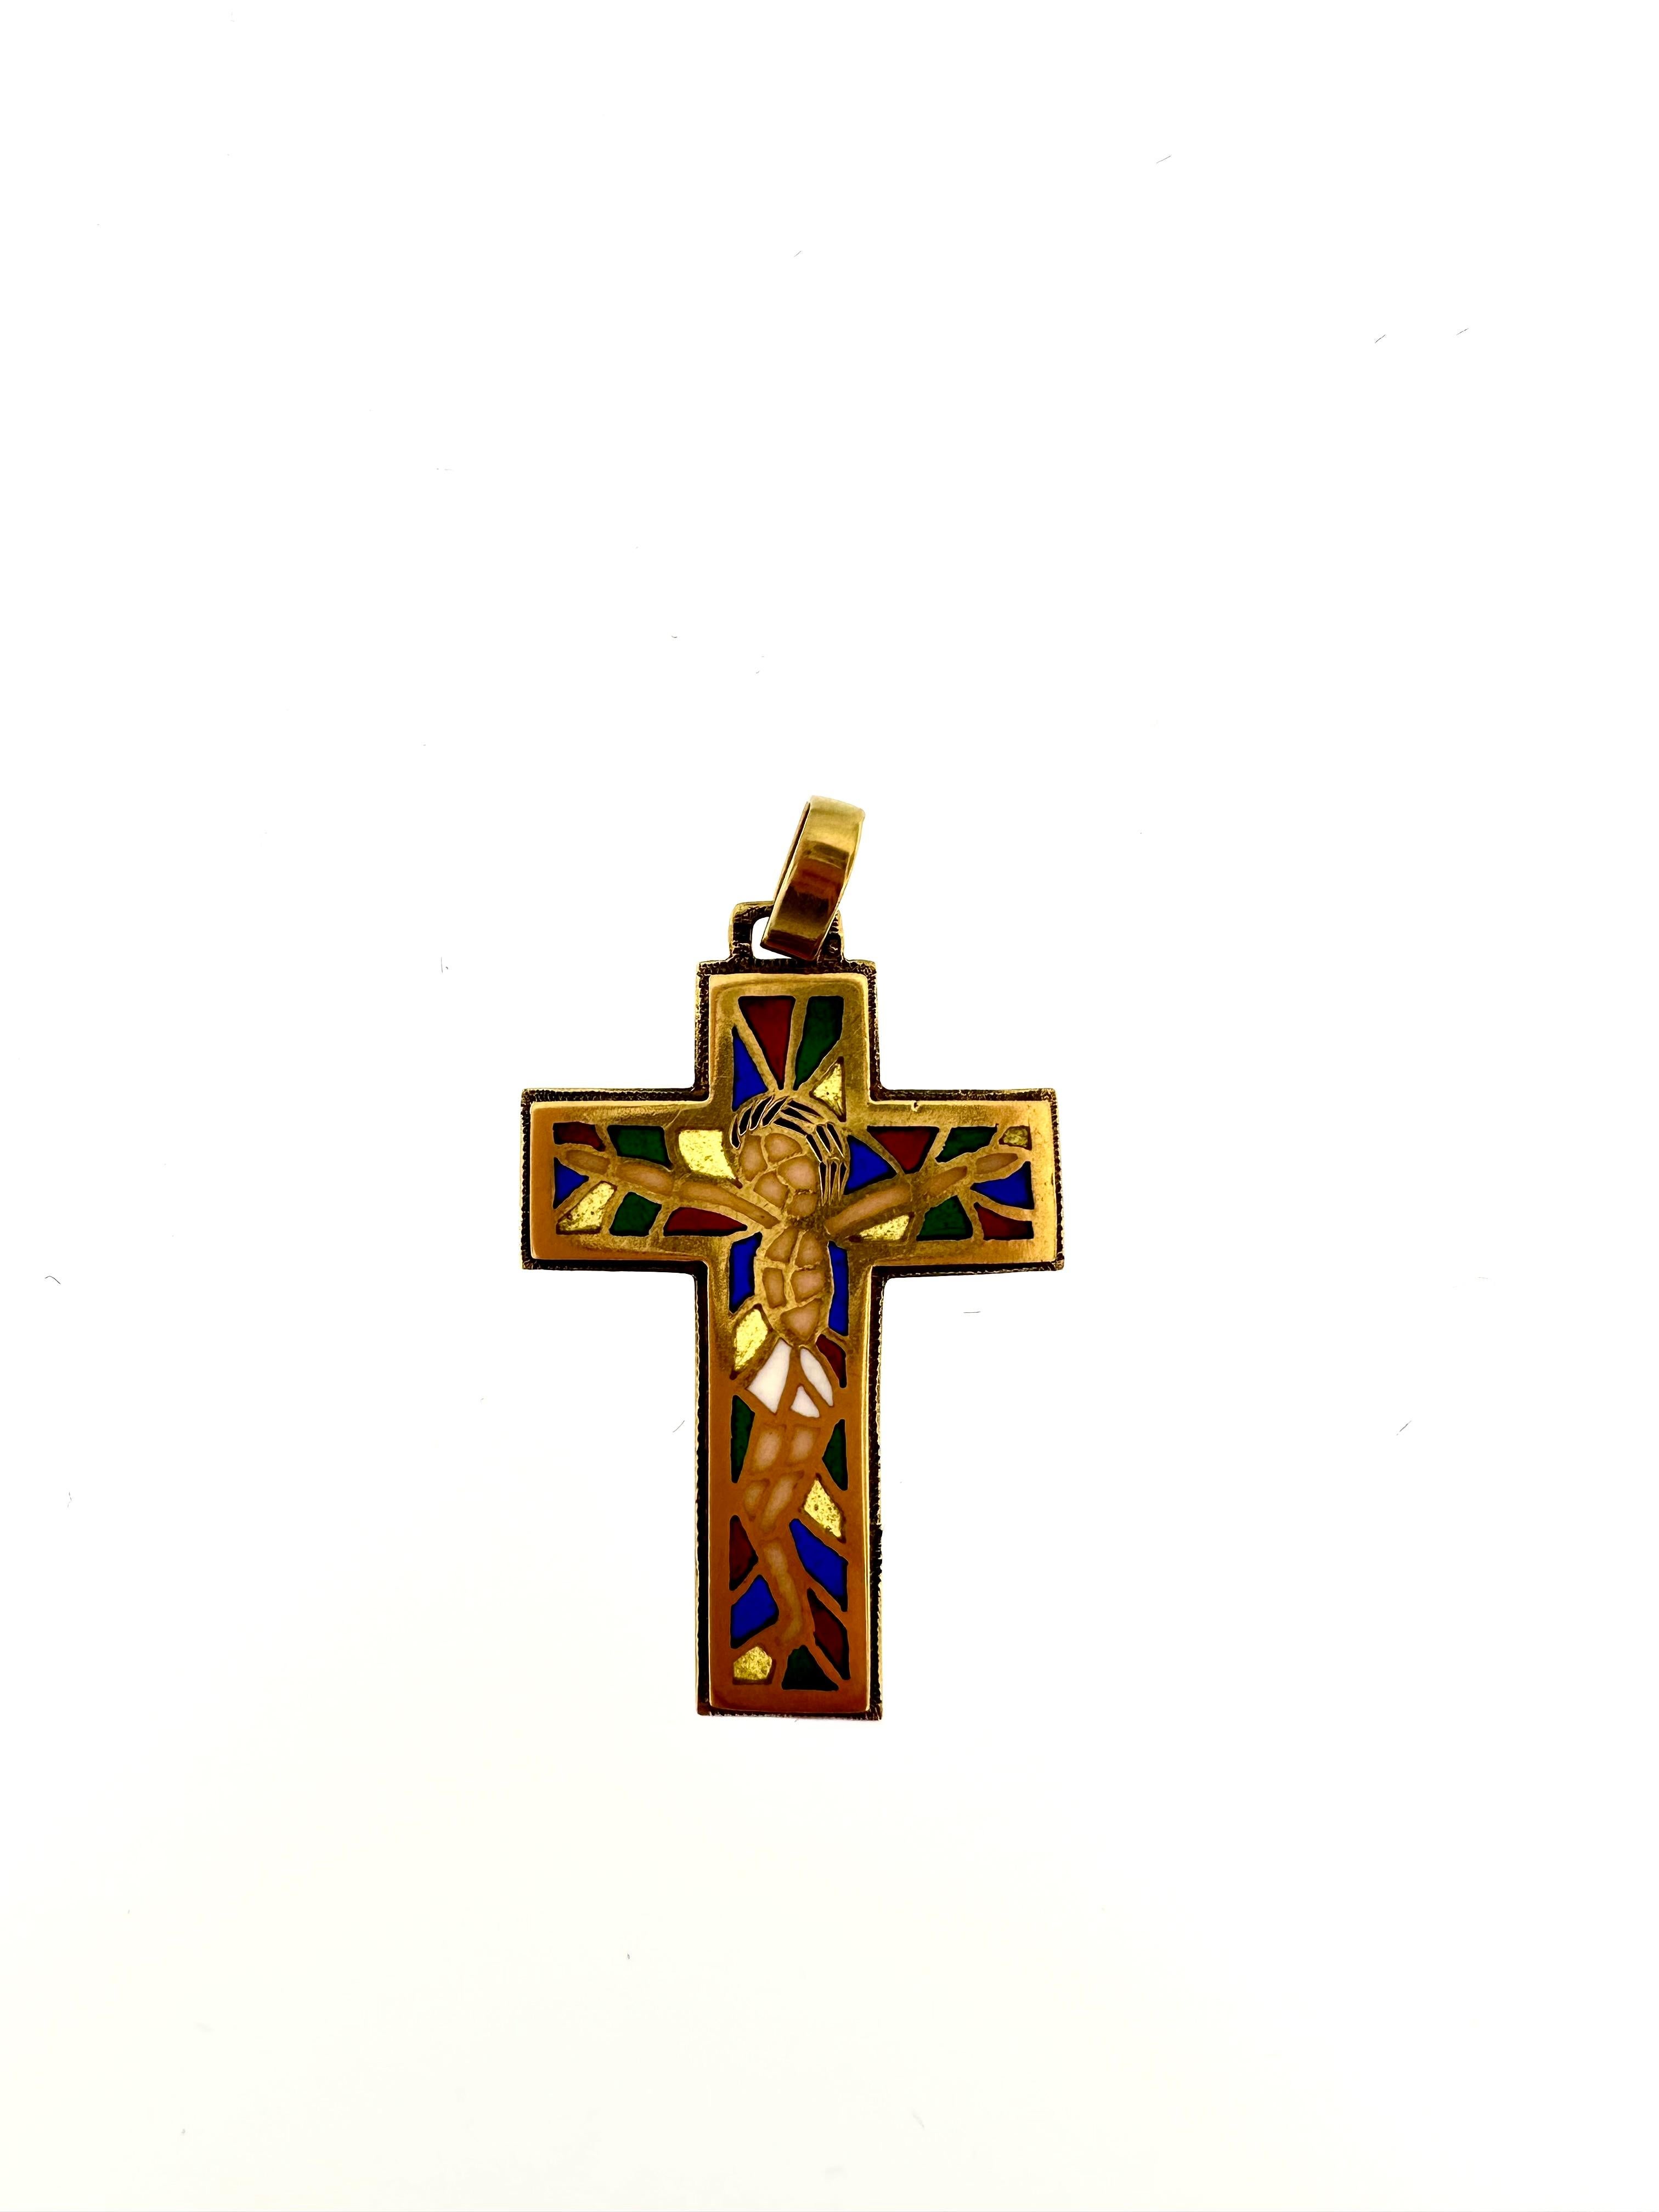 This gorgeous art nouveau cross is made with the stained glass technique, we find blue, red green, yellow, light pink and white among the colors used. This pendant placed against the light gives the effect of the stained glass windows of the